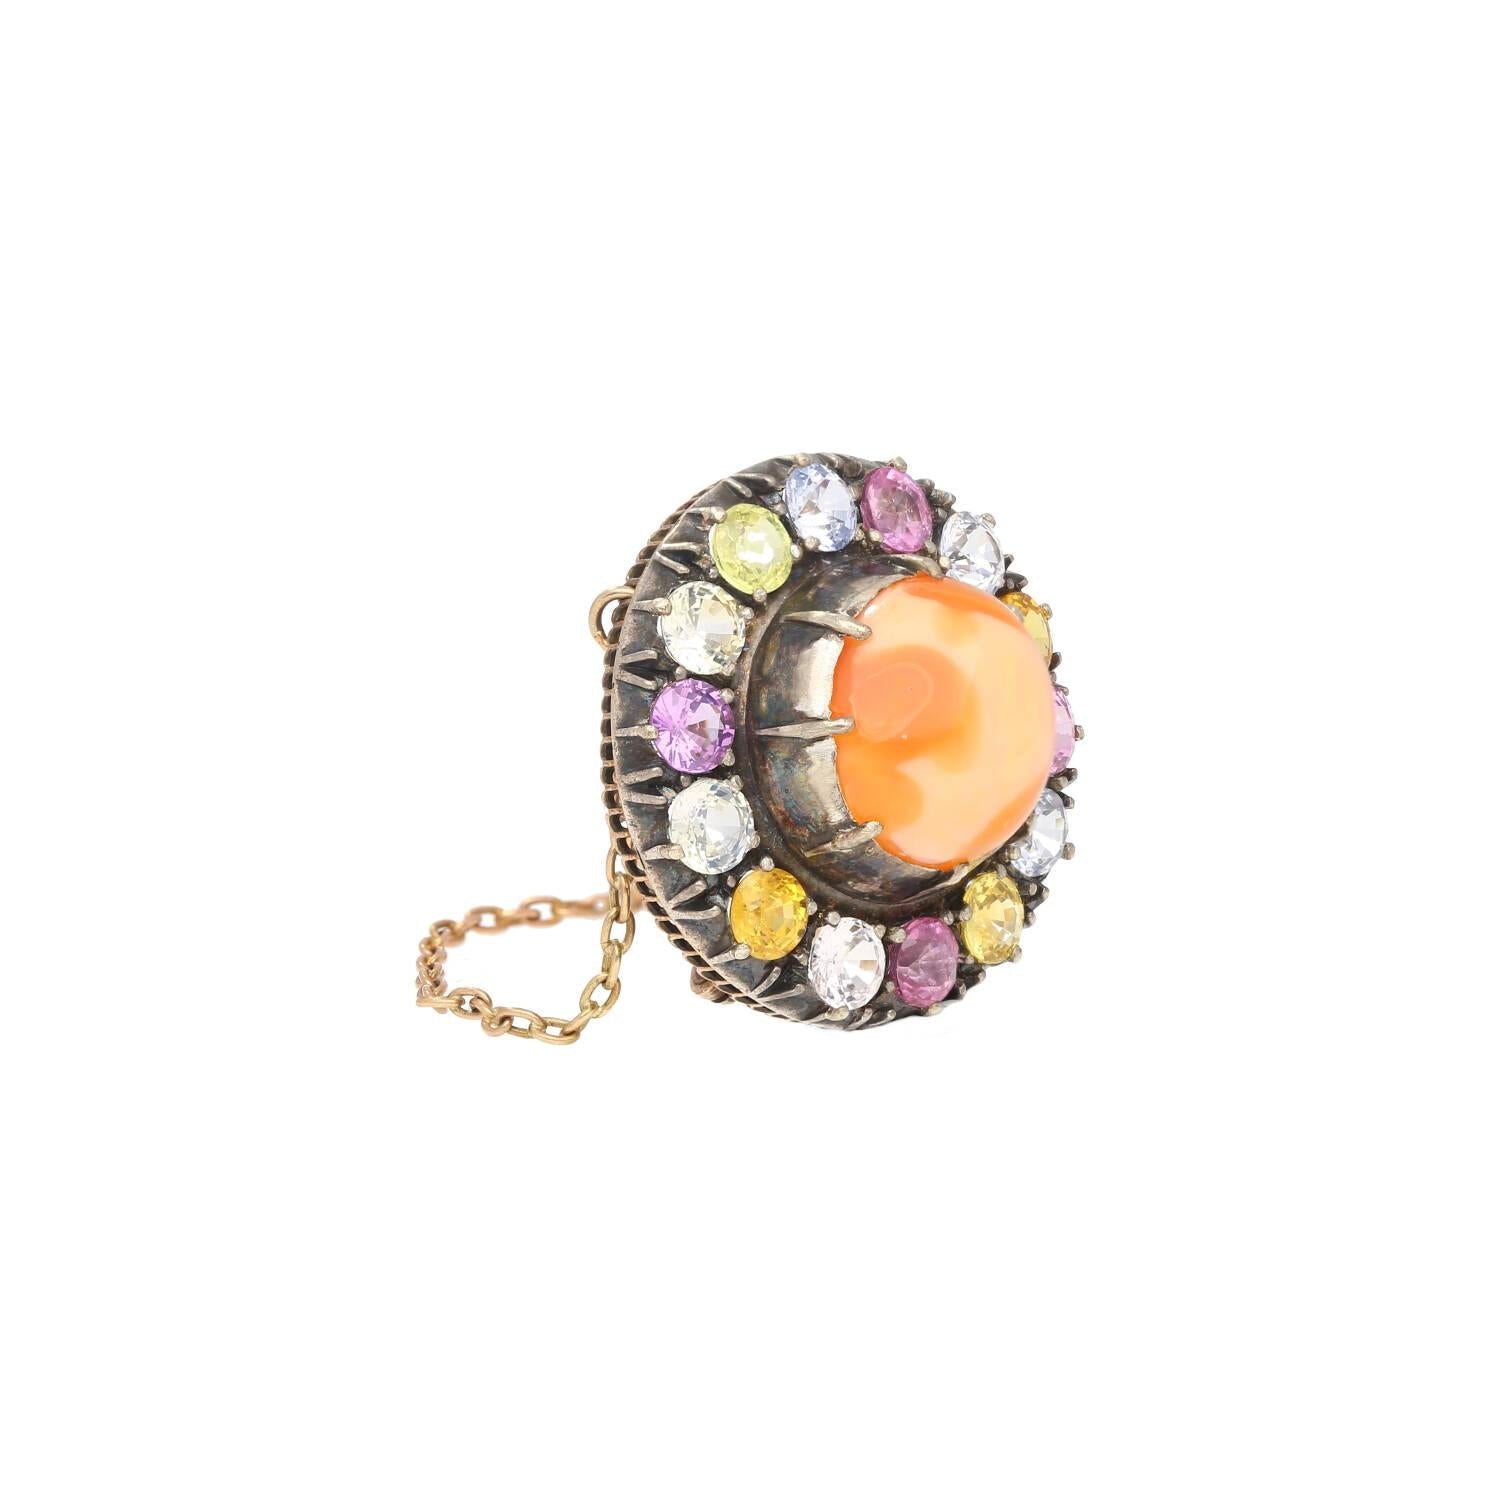 Natural 4.64 Carat Opal Pin with Multi Color Sapphire Detailing in Gold & Silver